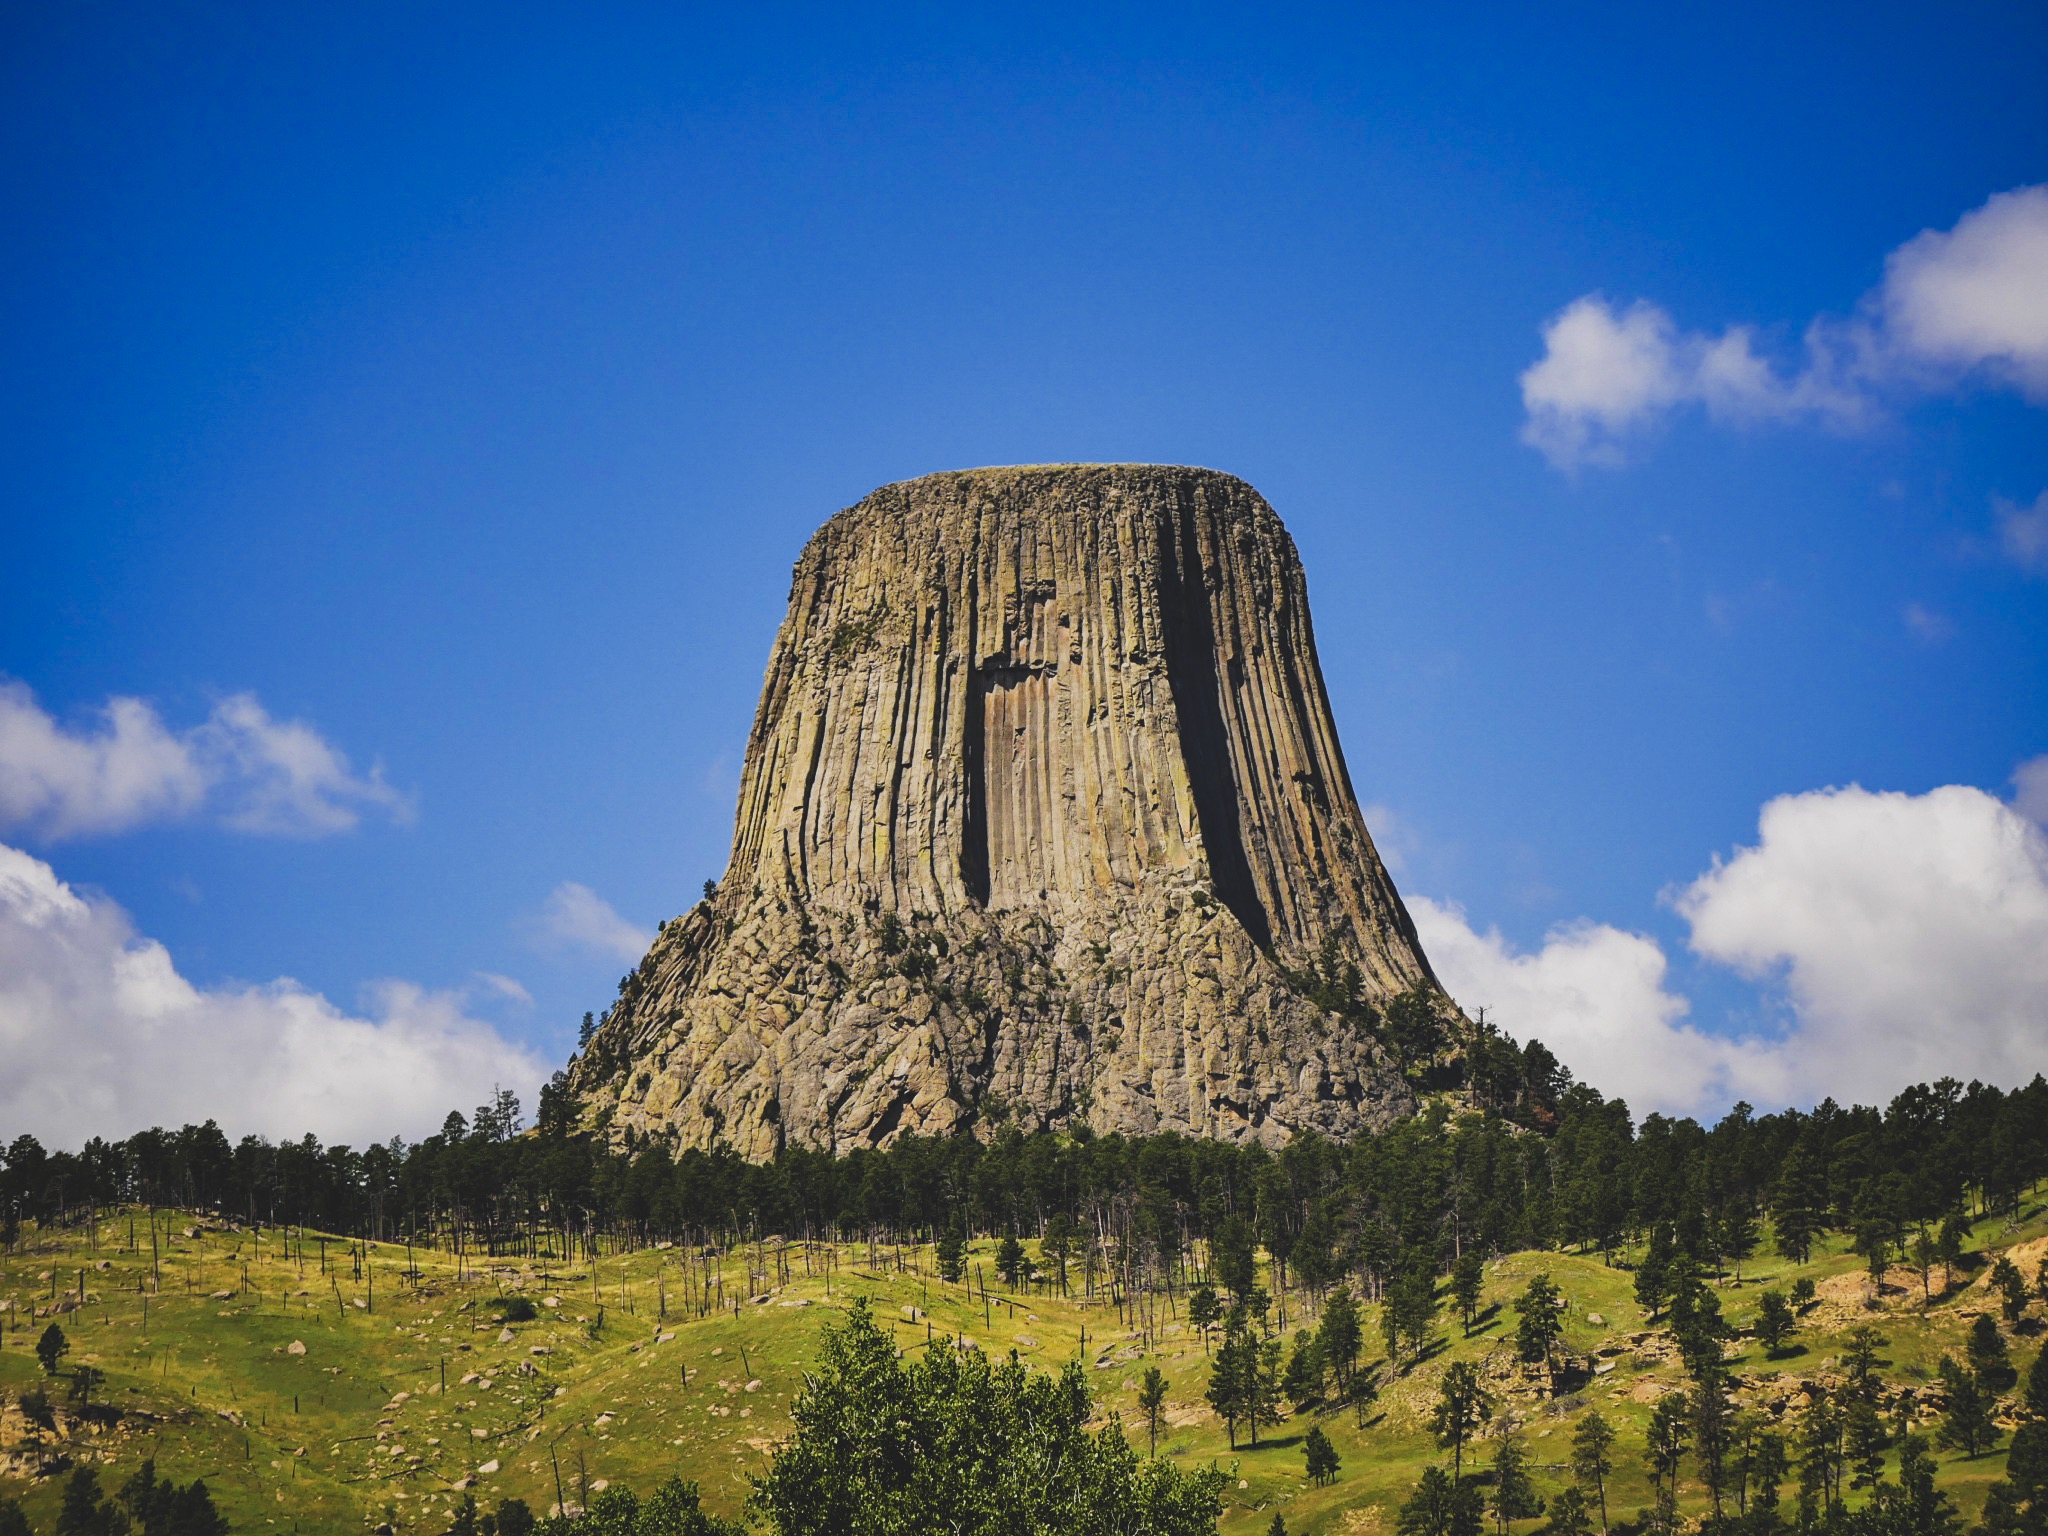 Mount Rushmore in South Dakota and Things to do Nearby